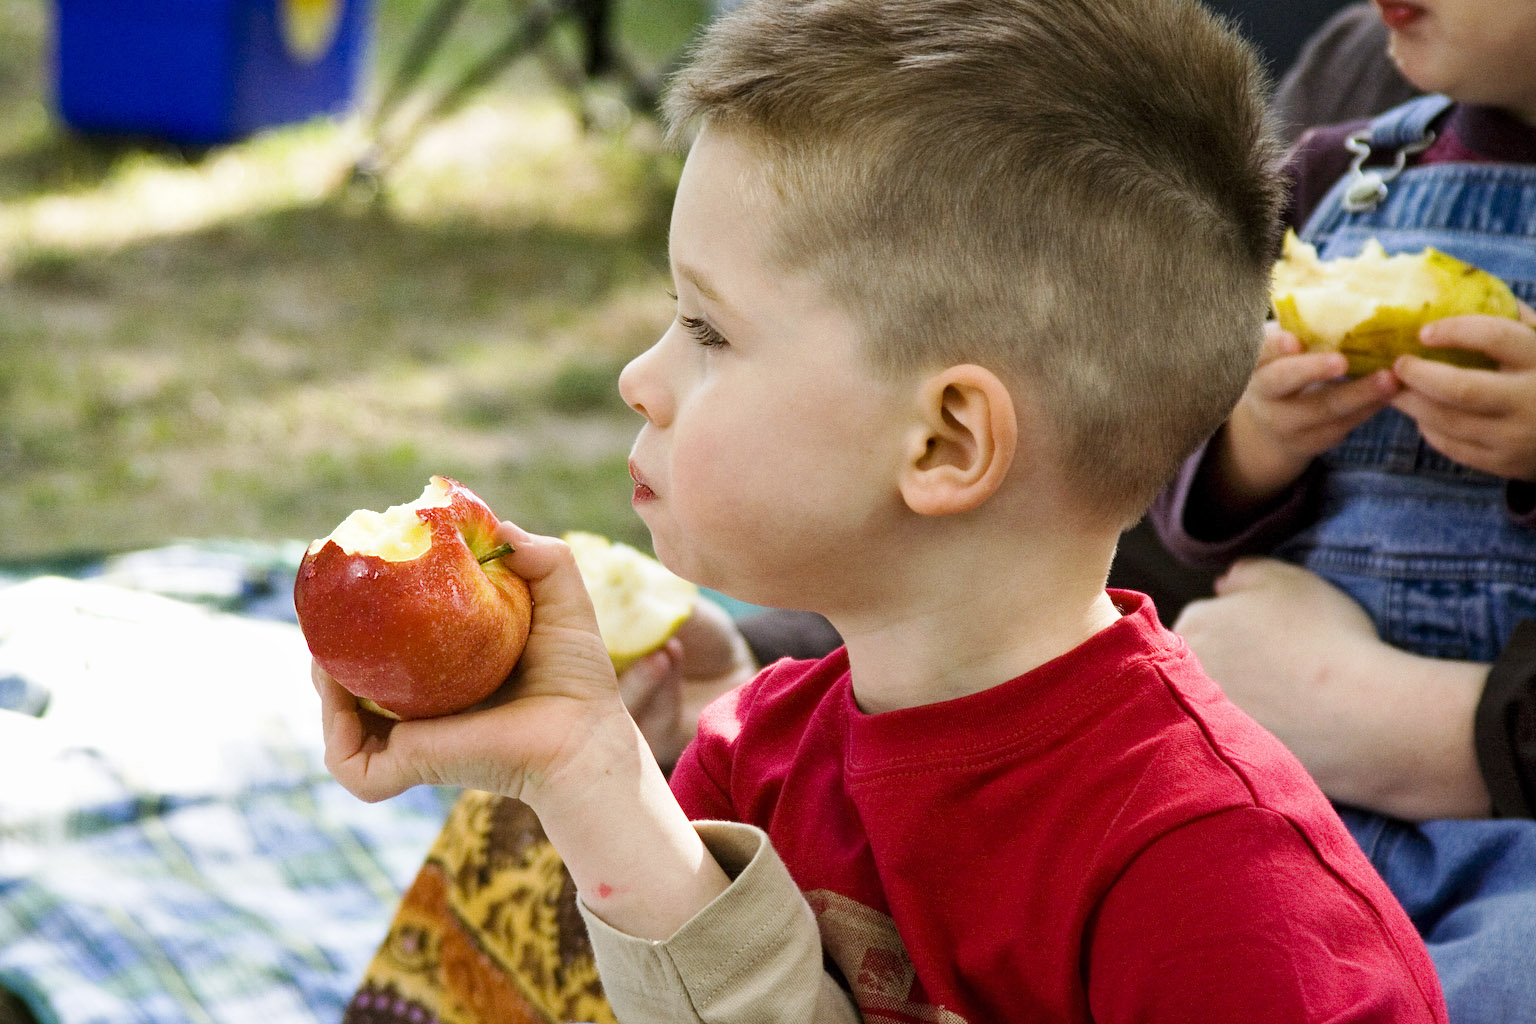 A young child holding and eating an apple